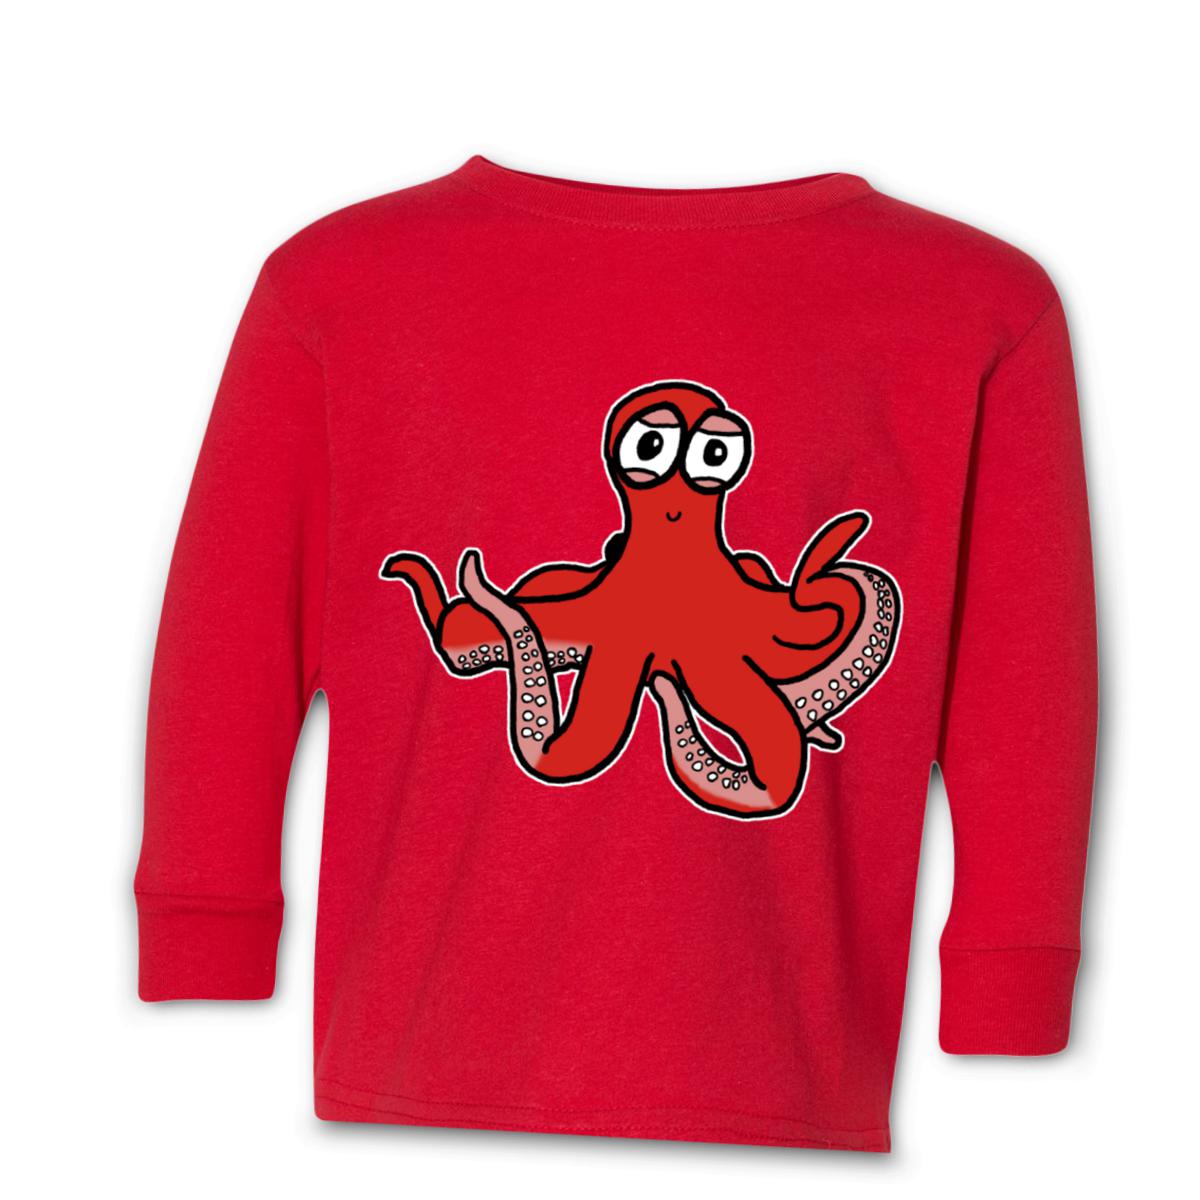 Octopus Toddler Long Sleeve Tee 2T red